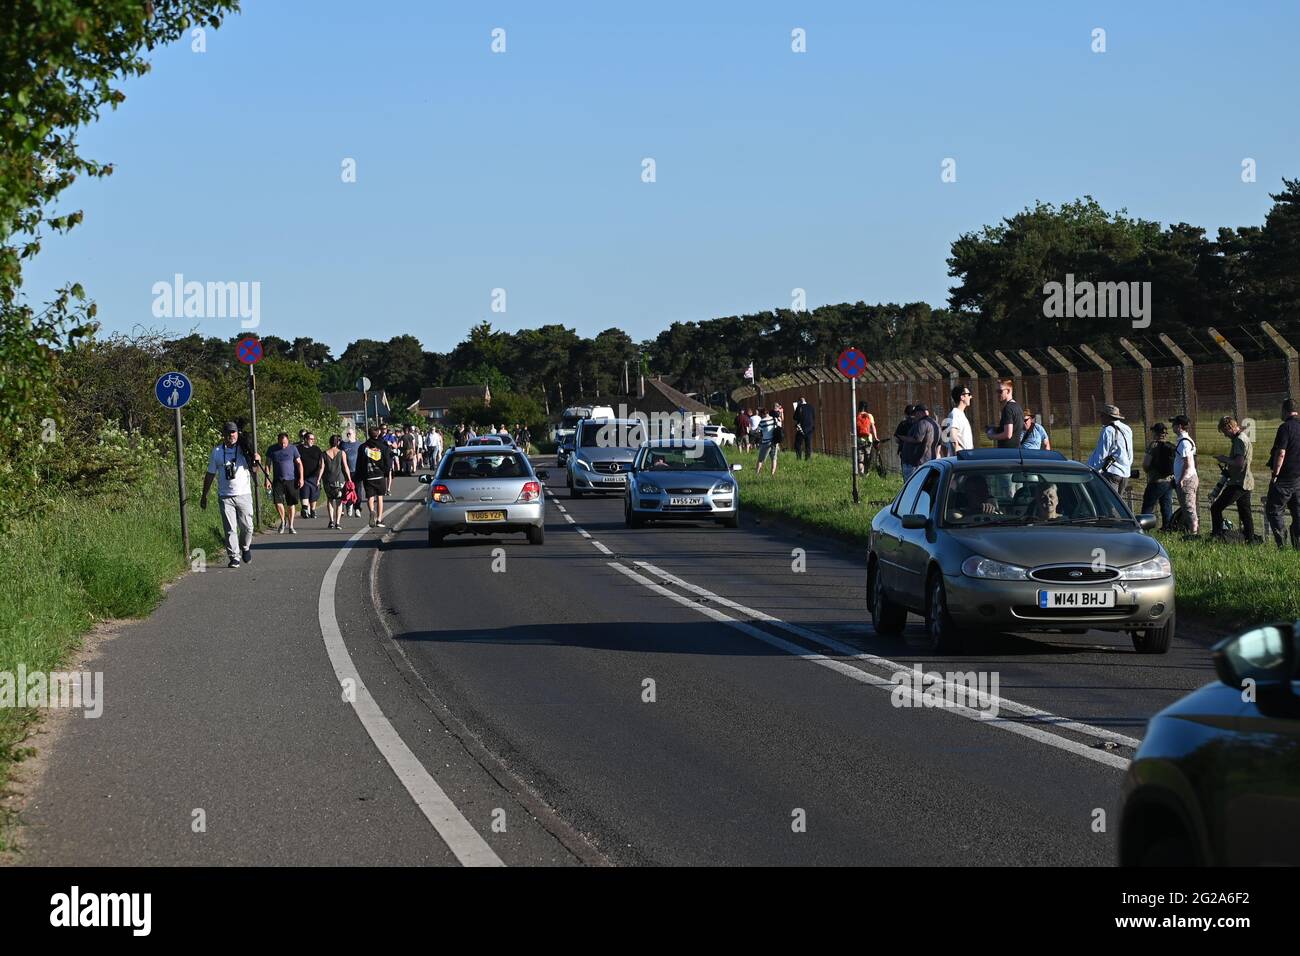 Crowd of plane spotters waiting for AirForce 1 to arrive at Mildenhall airshow base Stock Photo